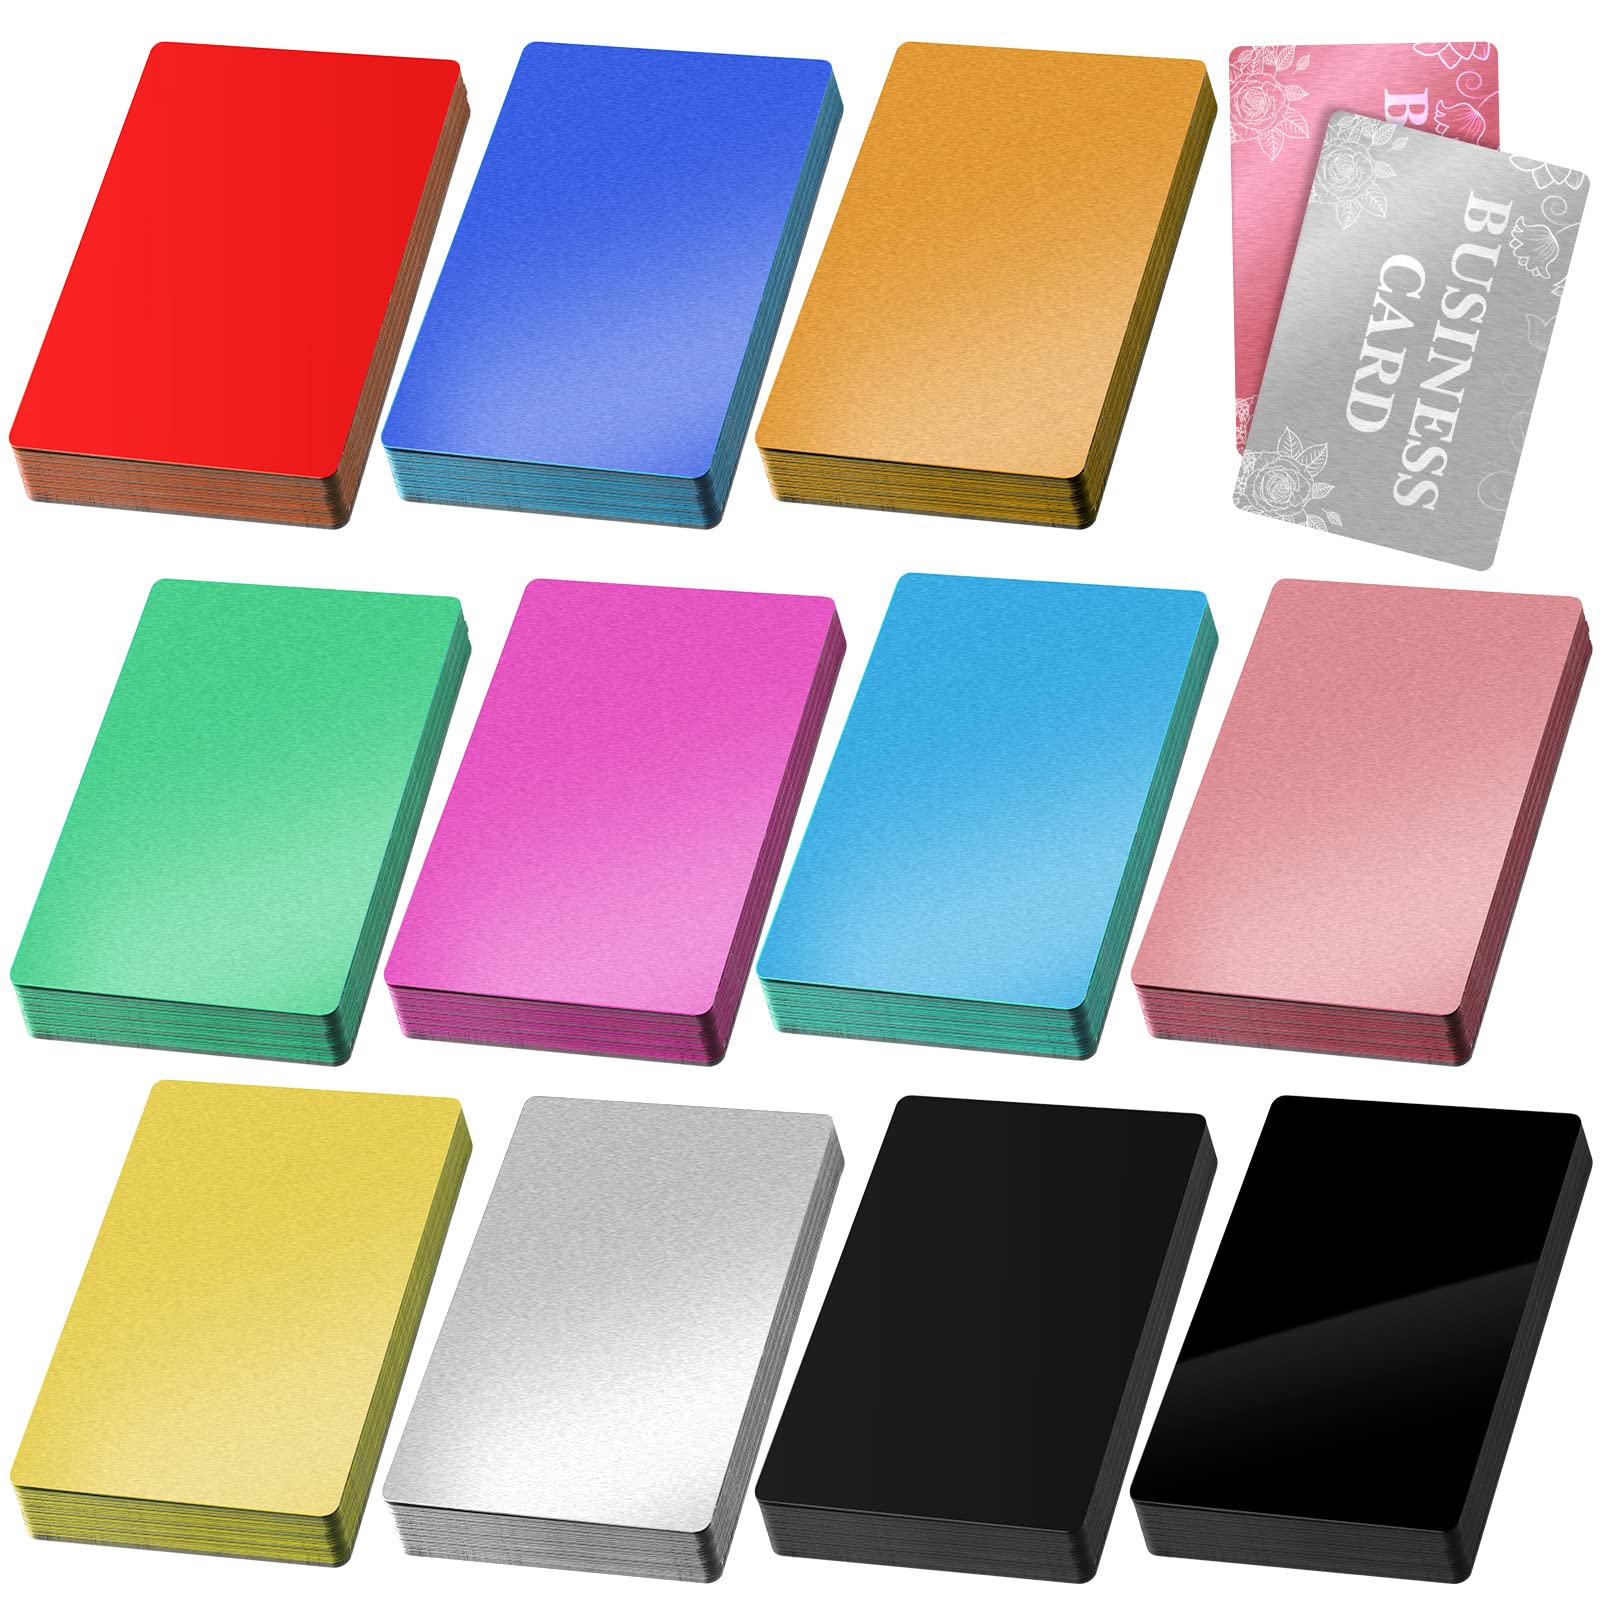 FONLAND Custom Metal Business Cards Multicolor Aluminium Alloy Personalize  Your Networking 100 Pcs/ Lot Fast Shipping - AliExpress